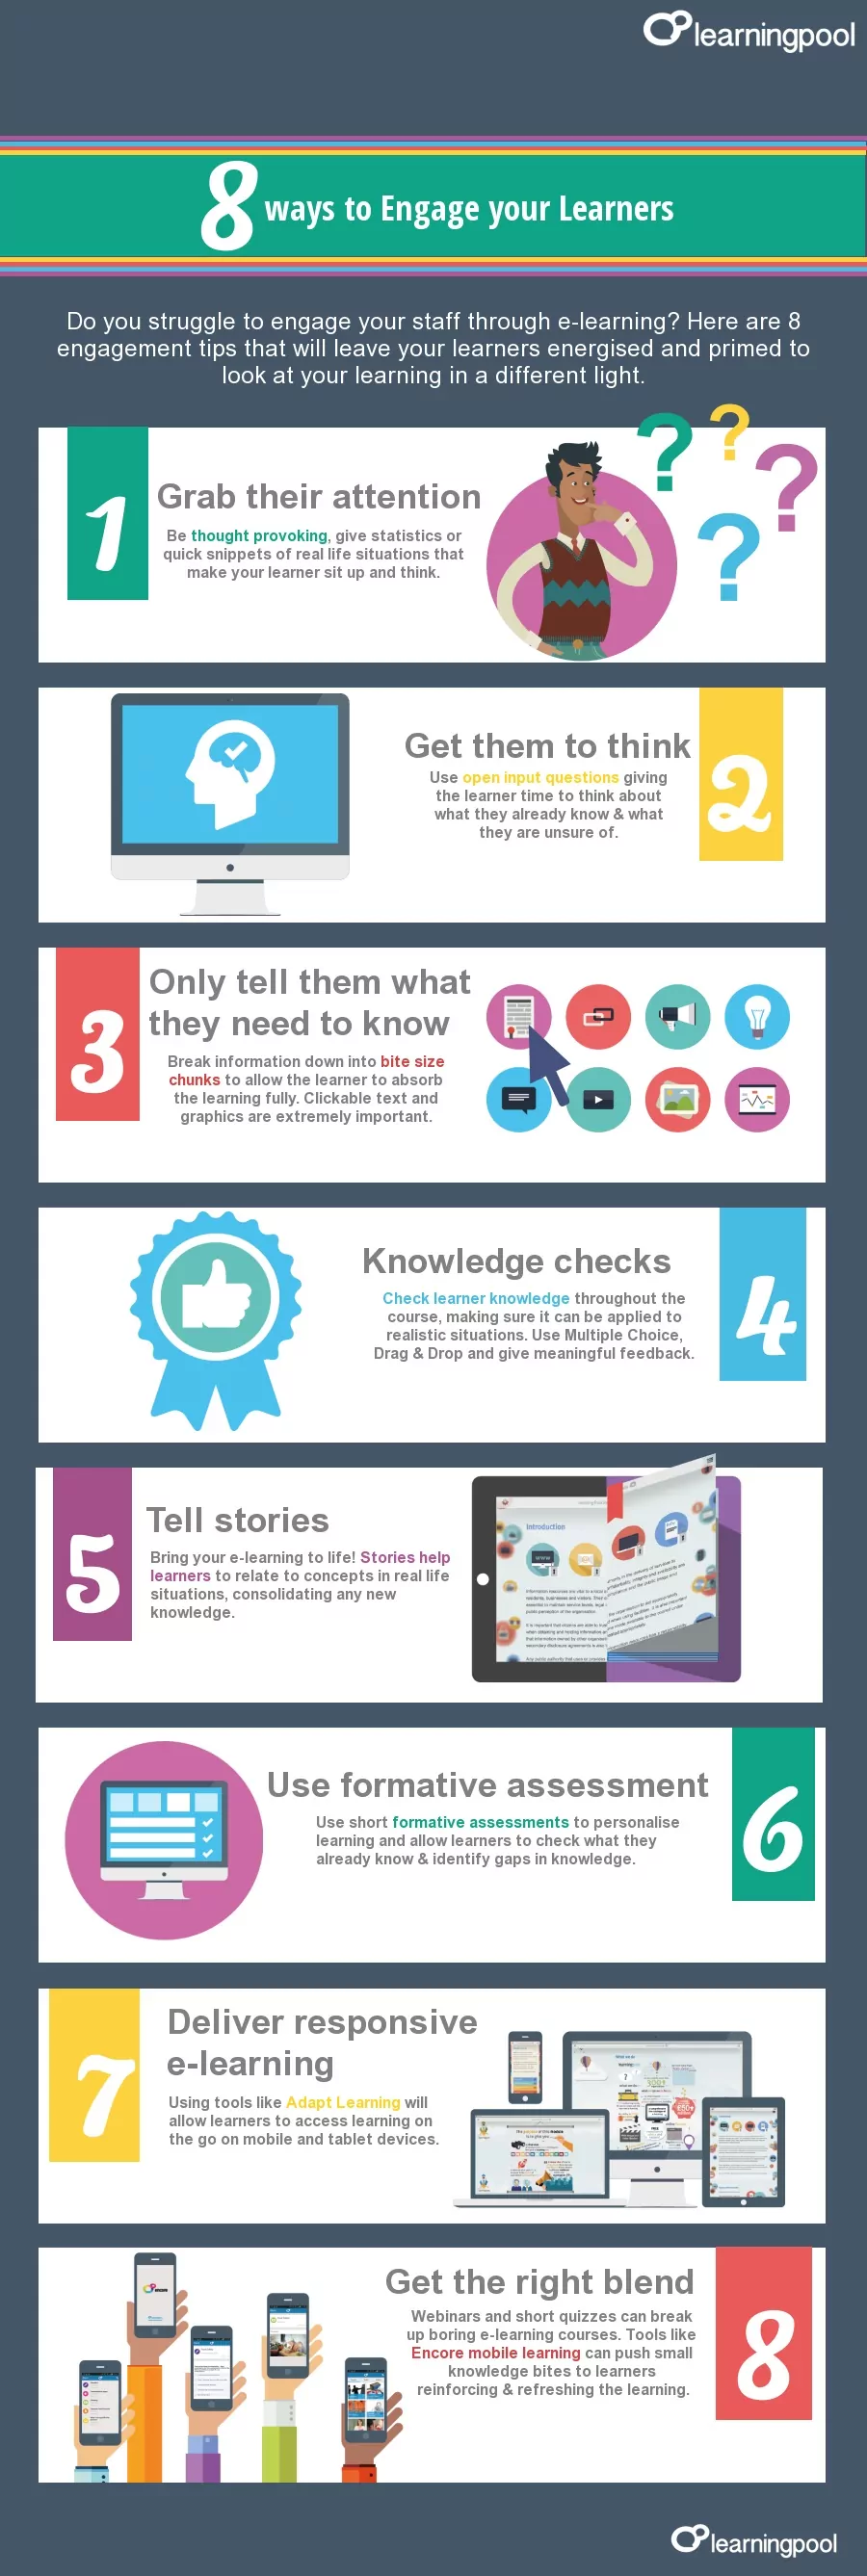 Tips to engage students